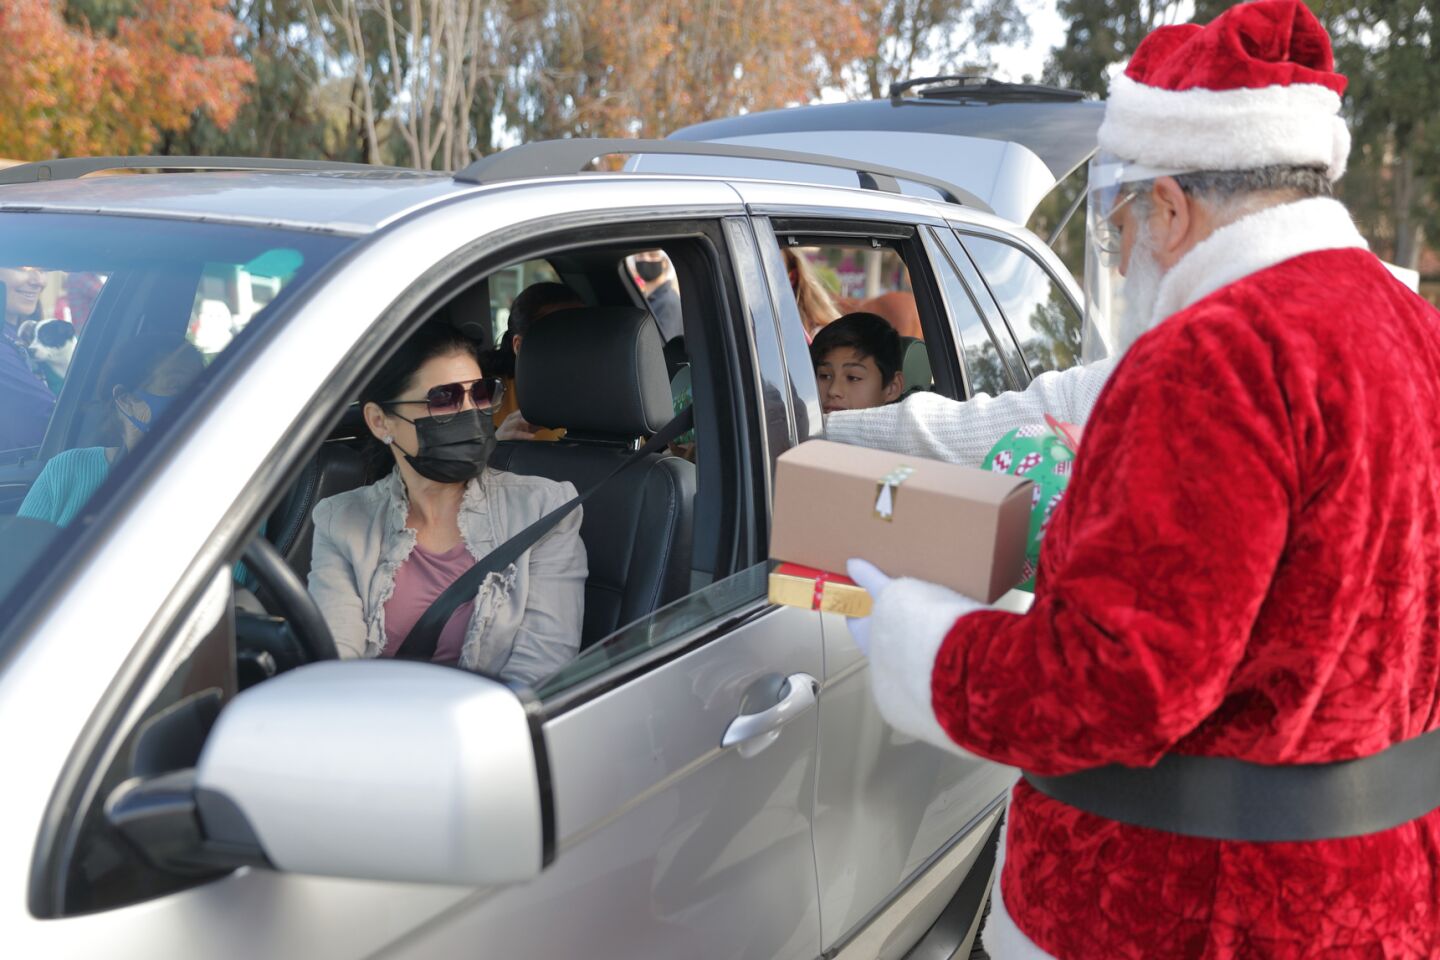 Santa greets a client with AniMeals gifts